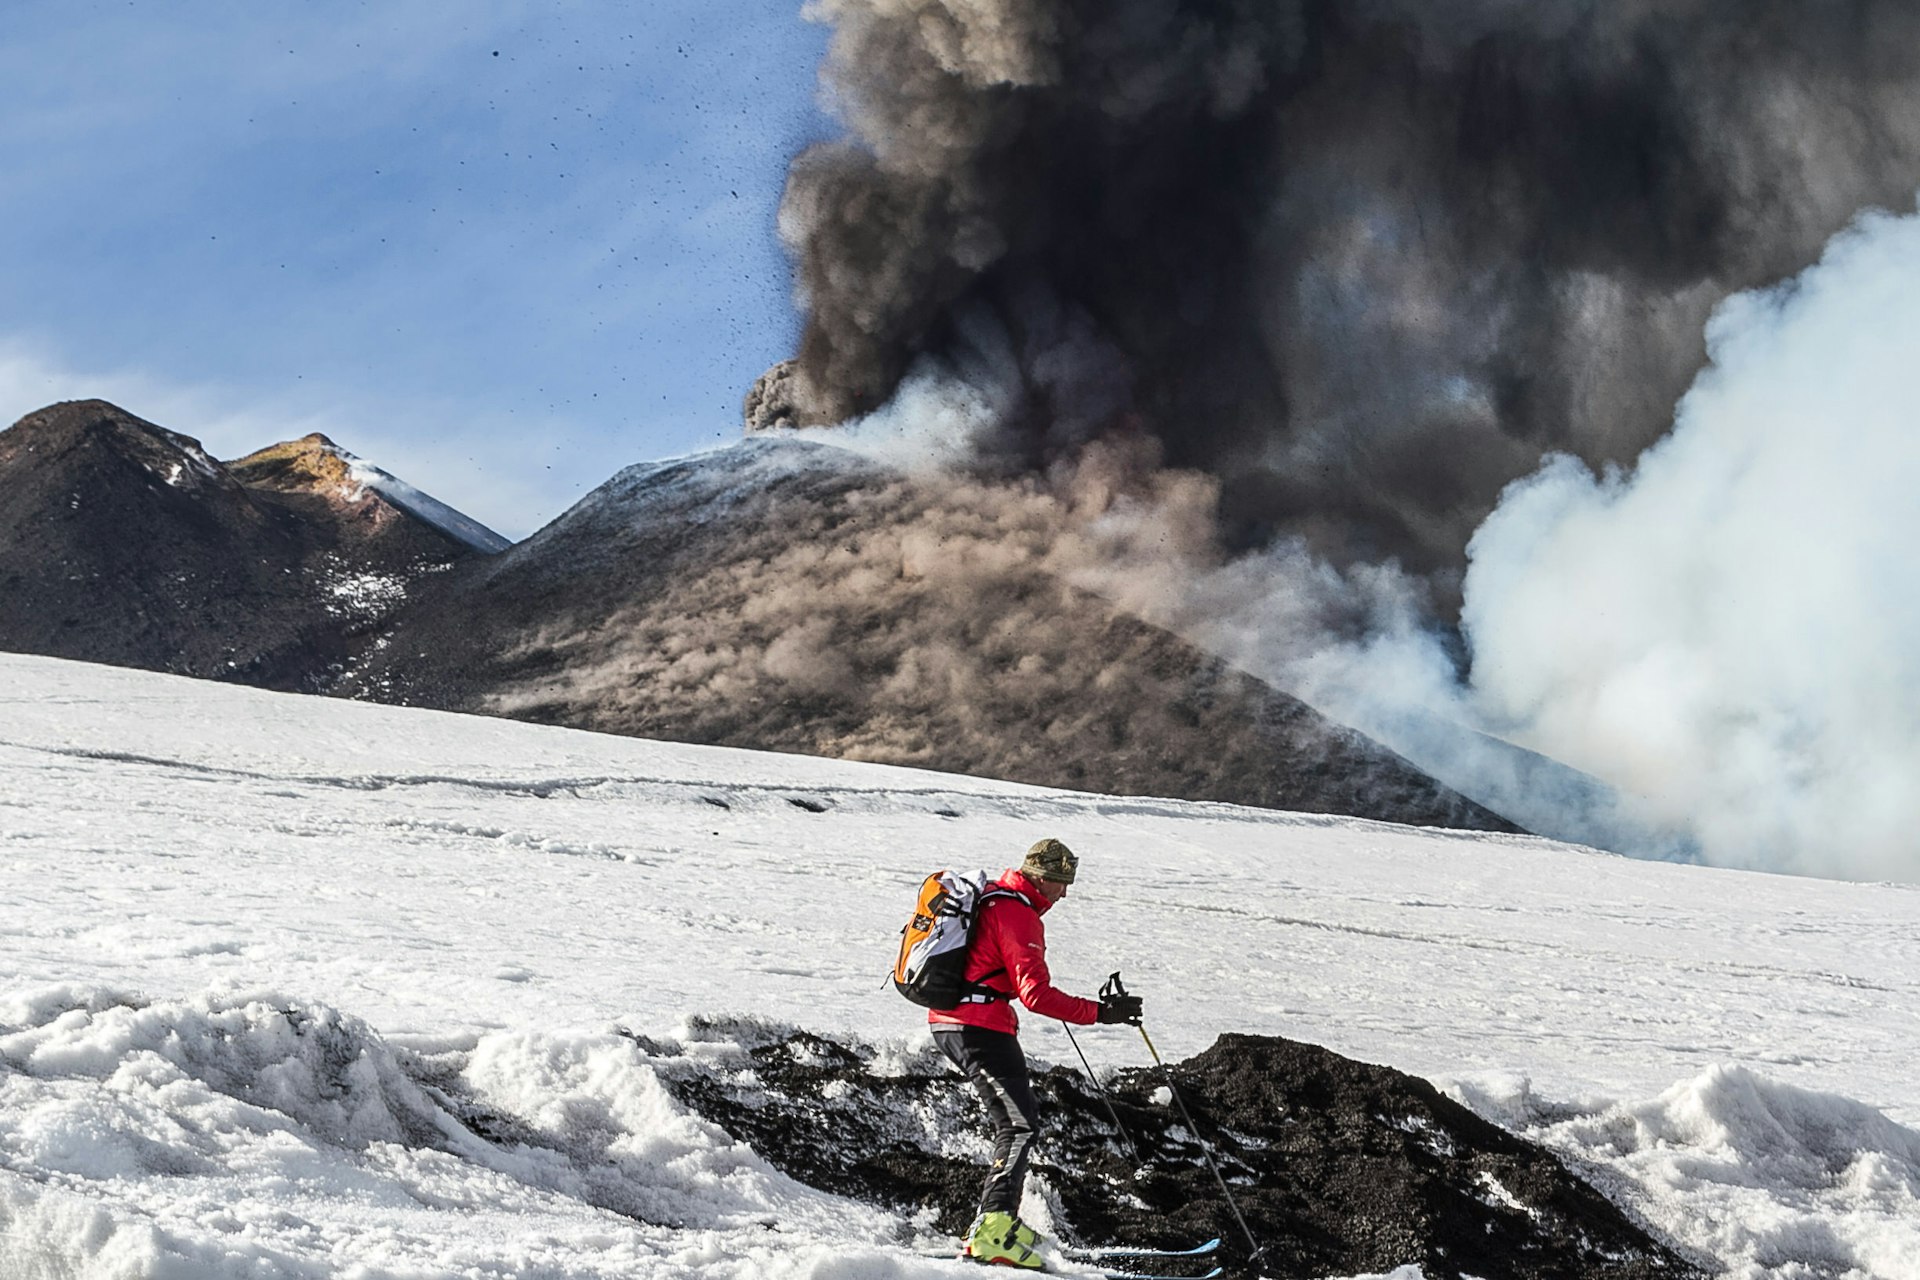 A skier heads down a mountain as a nearby volcano belches soot and black clouds into the sky 